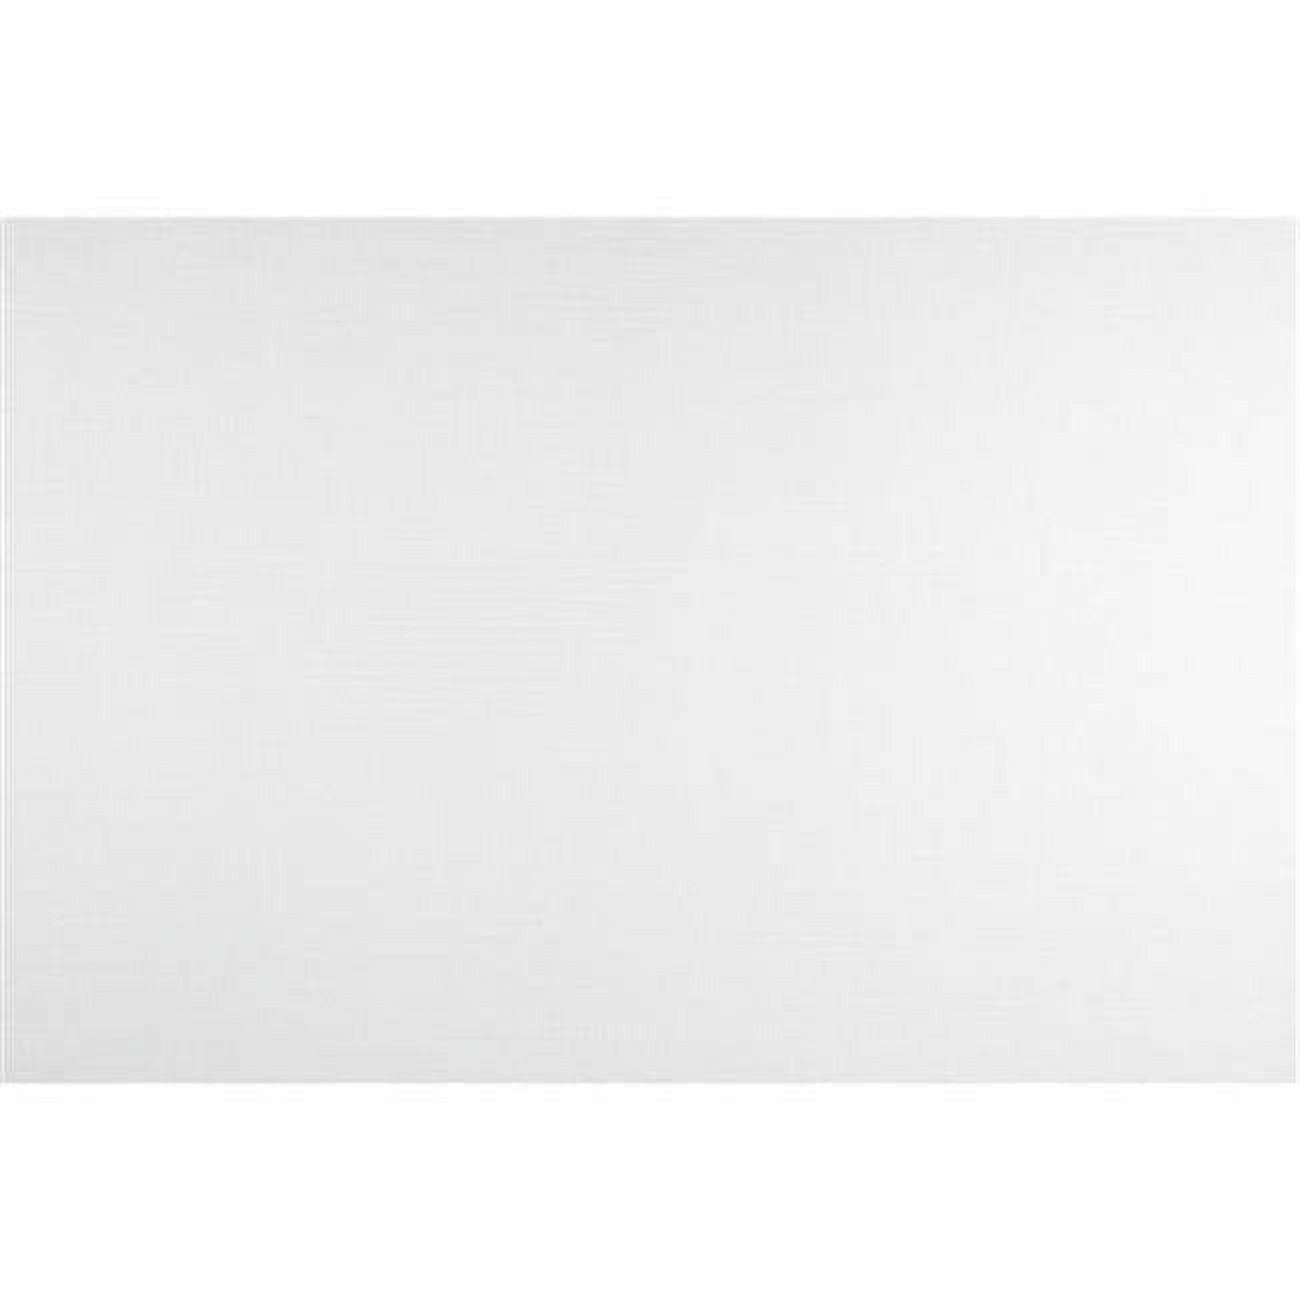 Picture of M-D Building Products 5020731 48 in. x 25 ft. Aluminum Screen, Charcoal